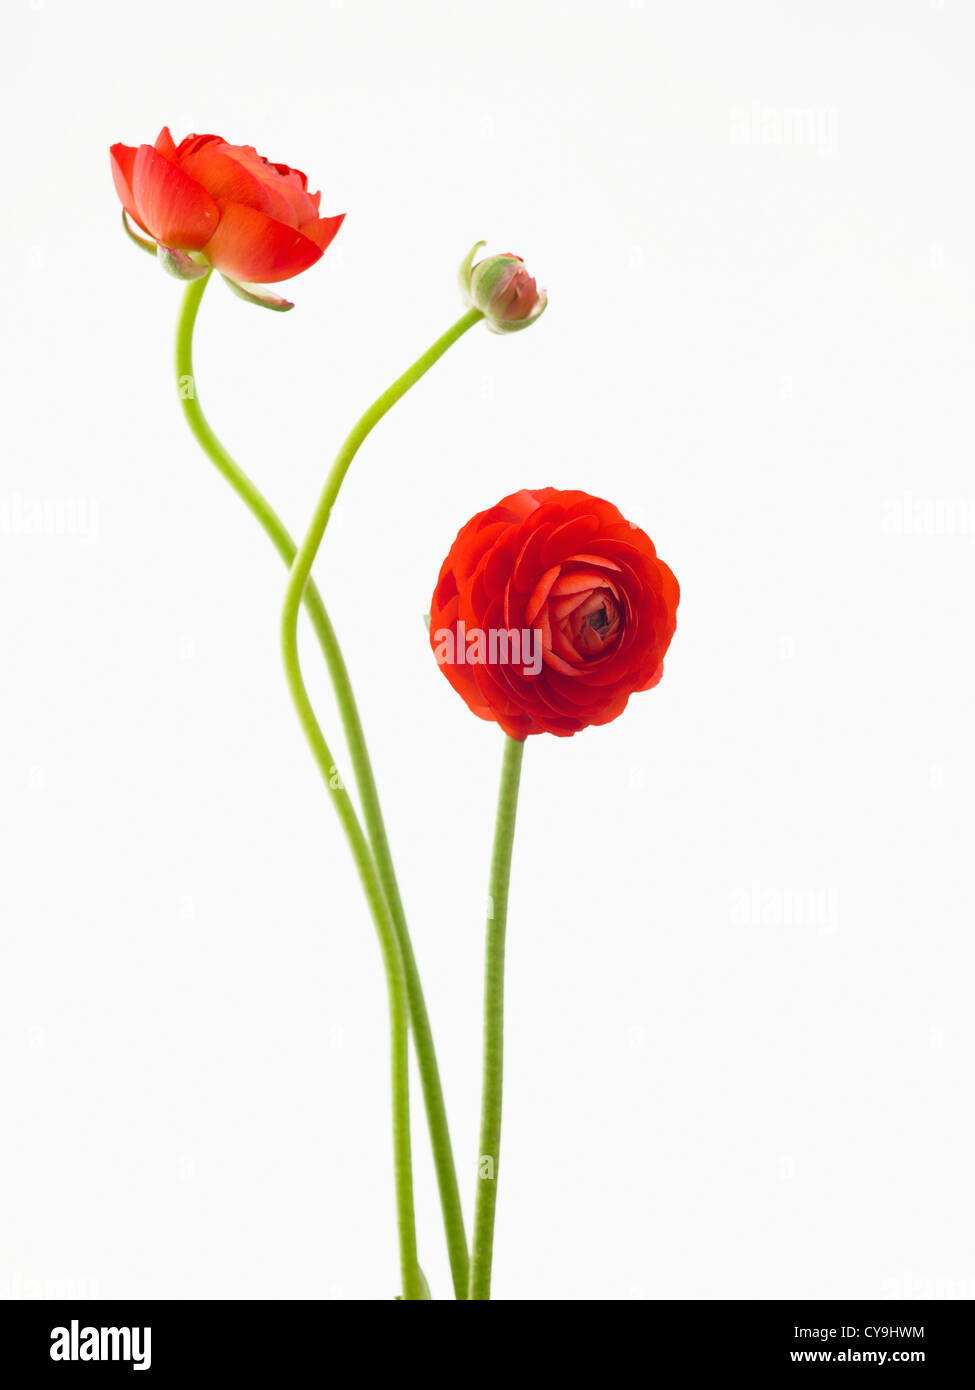 Ranunculus asiaticus 'Elegance Red', Red Persian ranunculus against a white background. Stock Photo